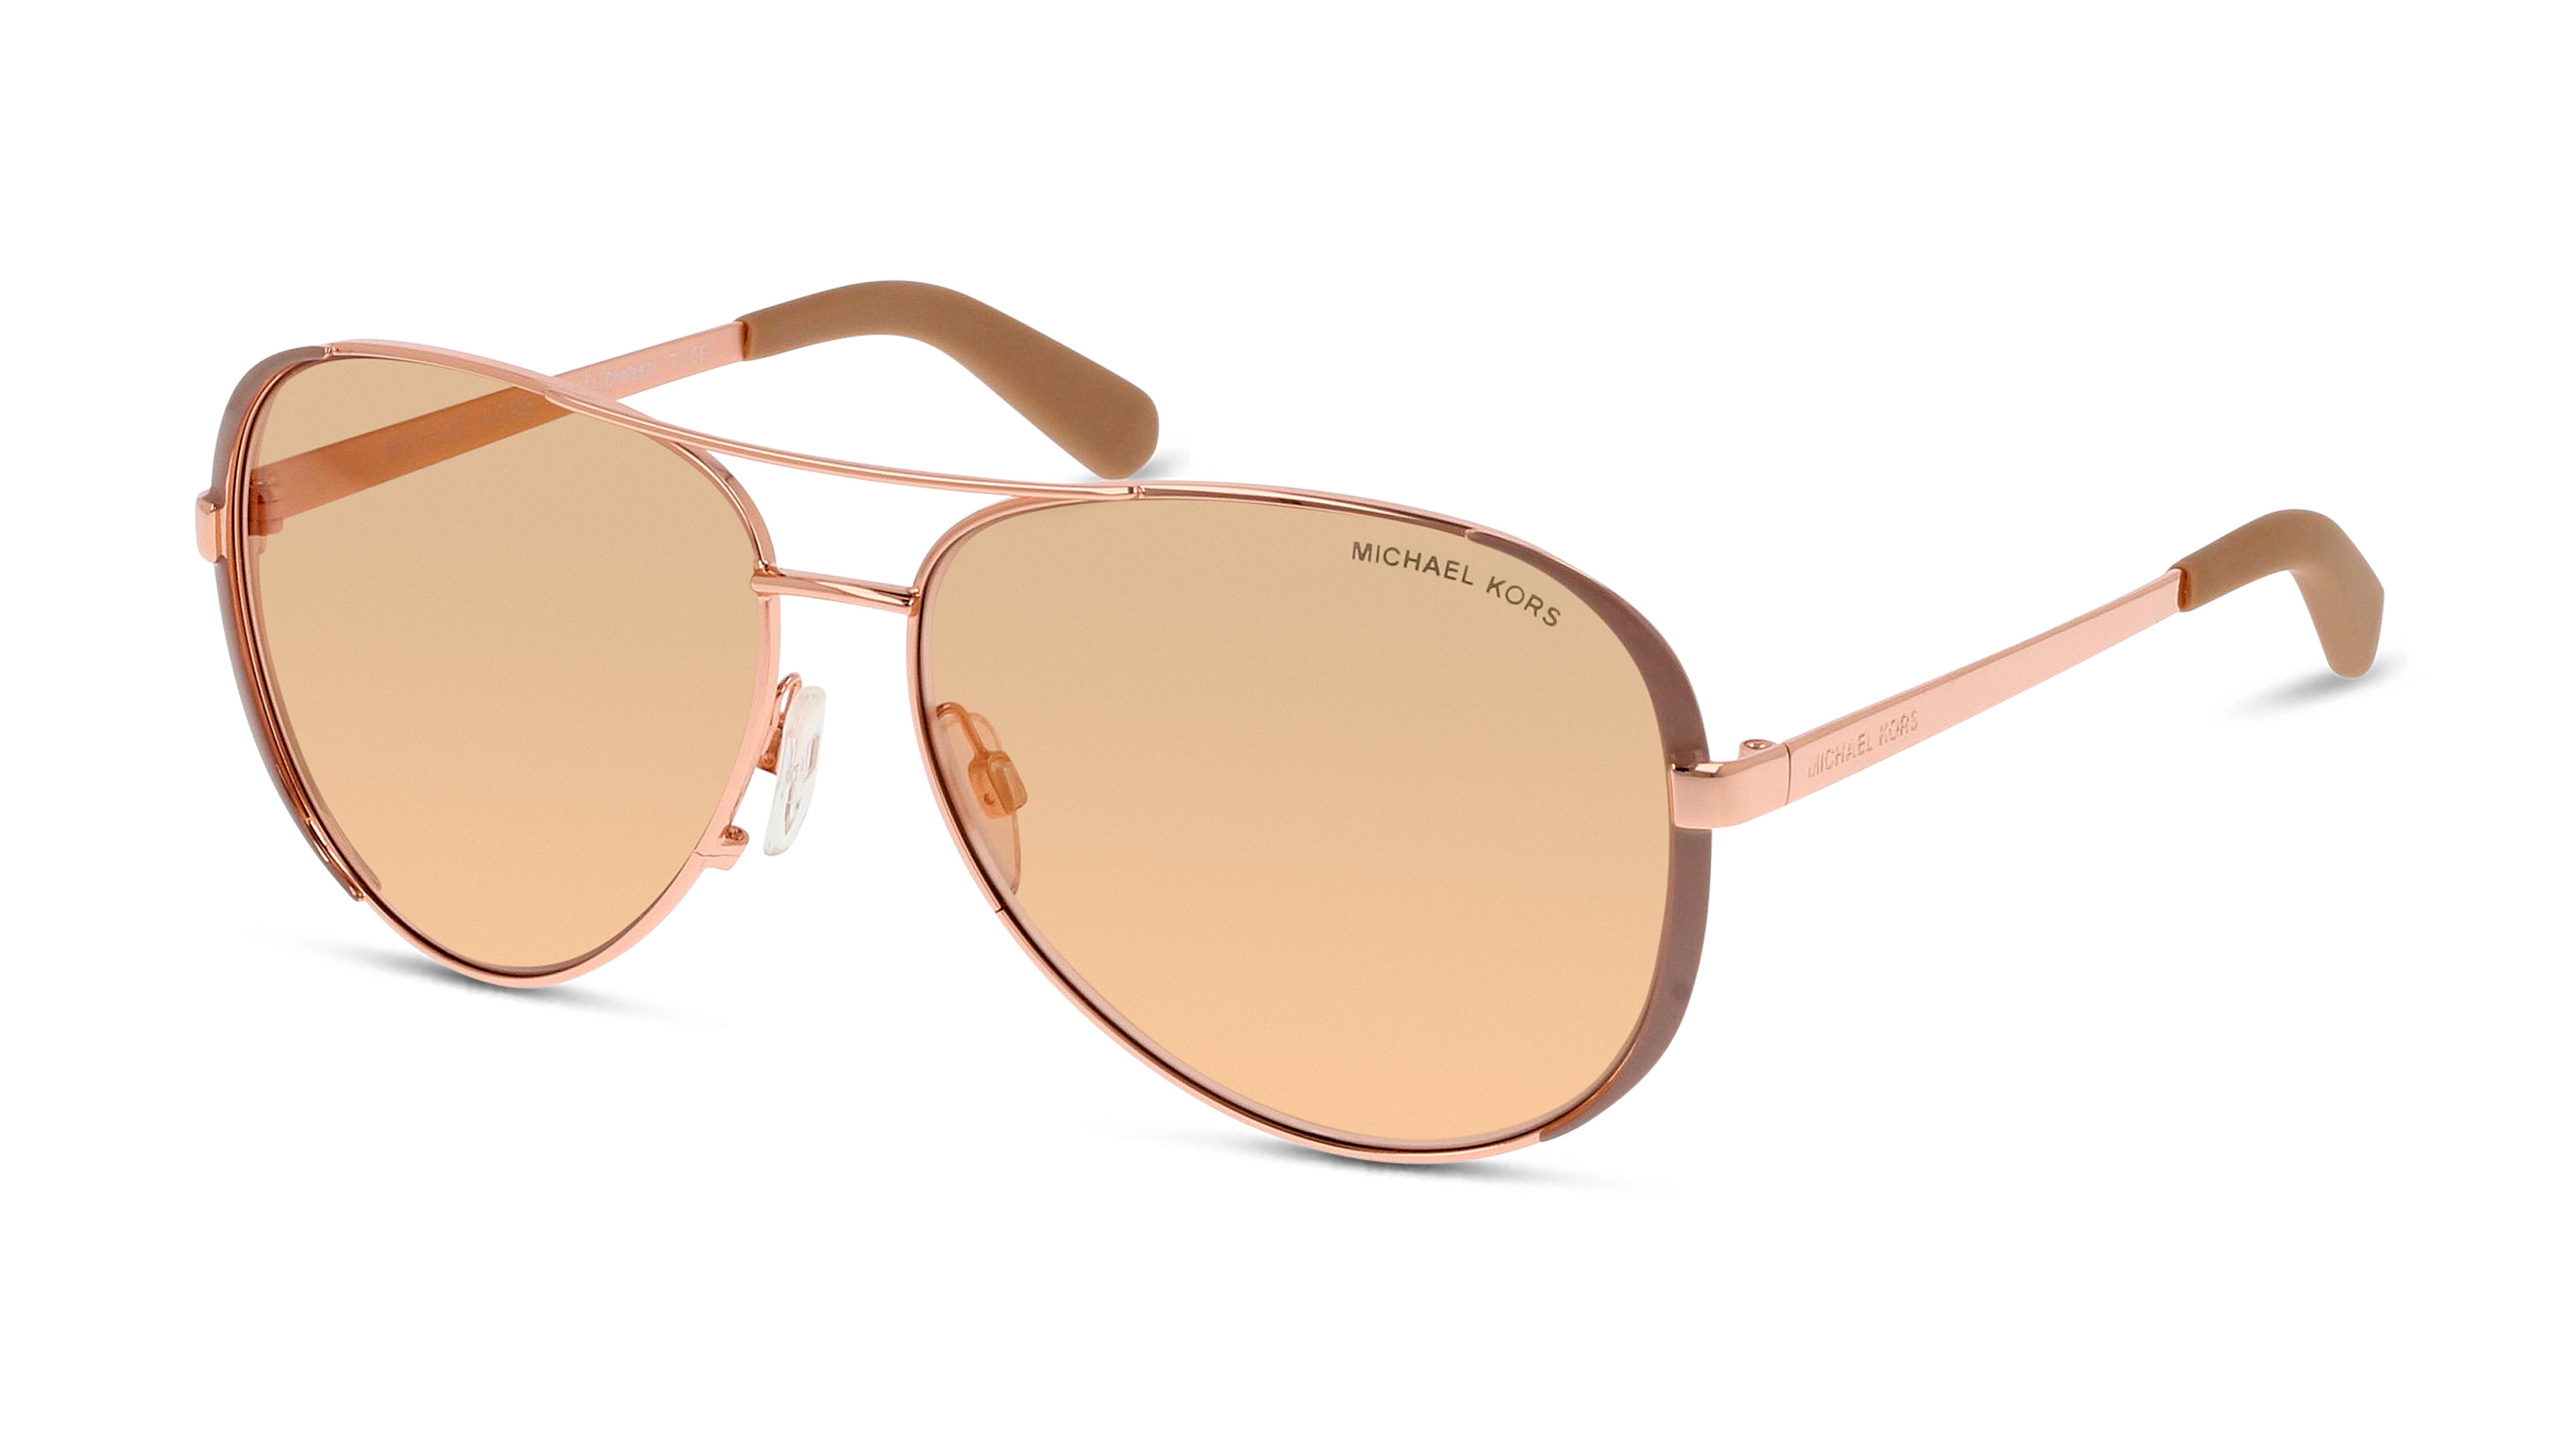 [products.image.angle_left01] Michael Kors CHELSEA 0MK5004 1017R1 Sonnenbrille